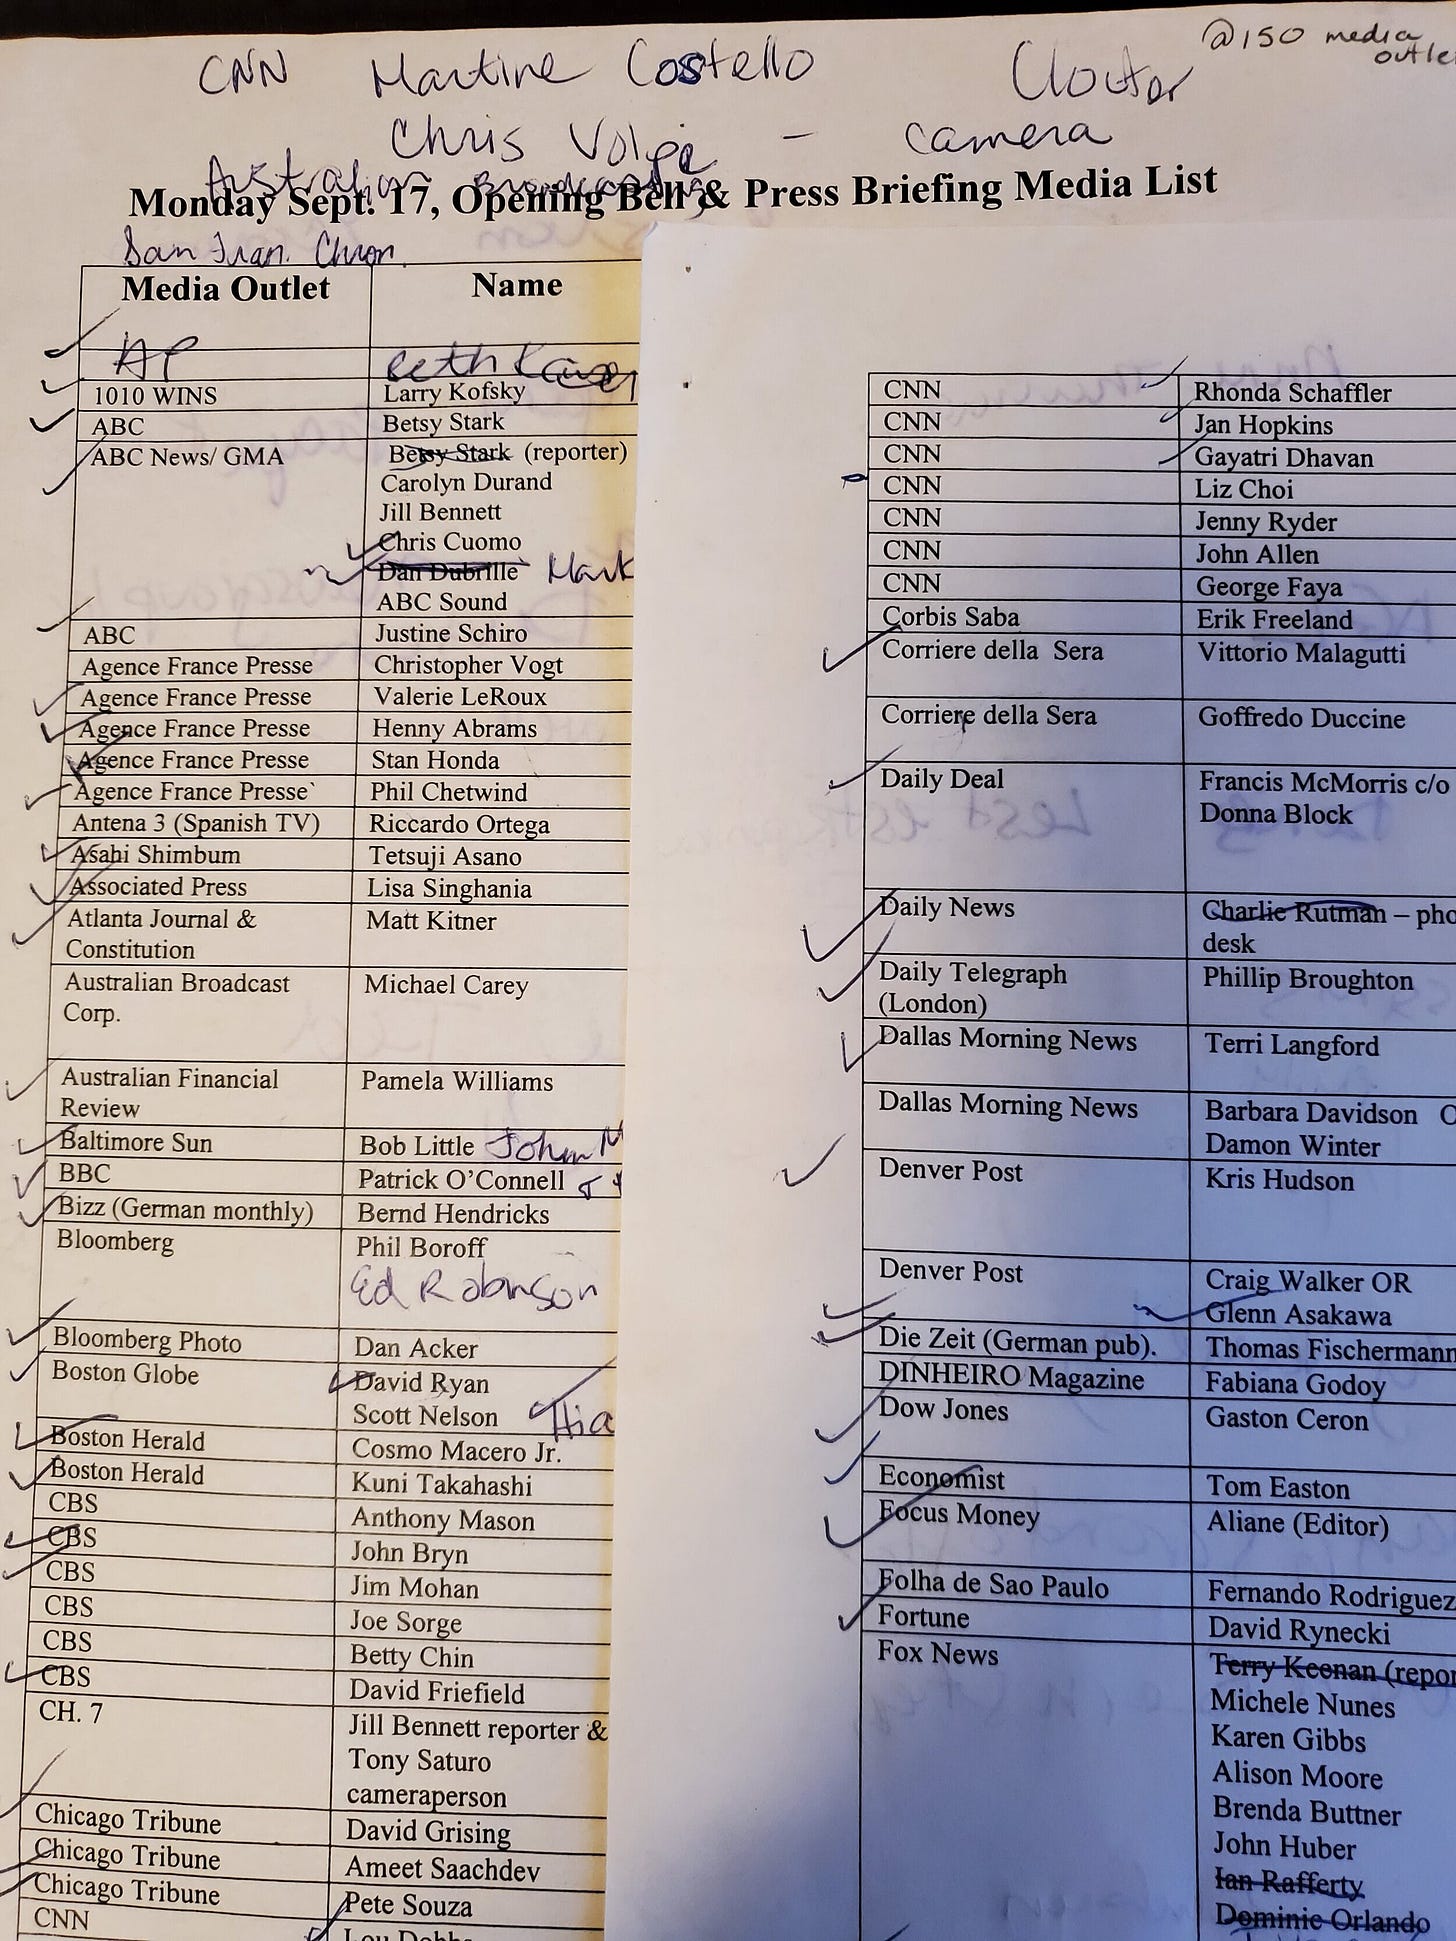 I kept the pre-event press list. There are more than five pages, which together list approximately 200 names, and more than 150 additional names are handwritten on the reverse sides and margins.